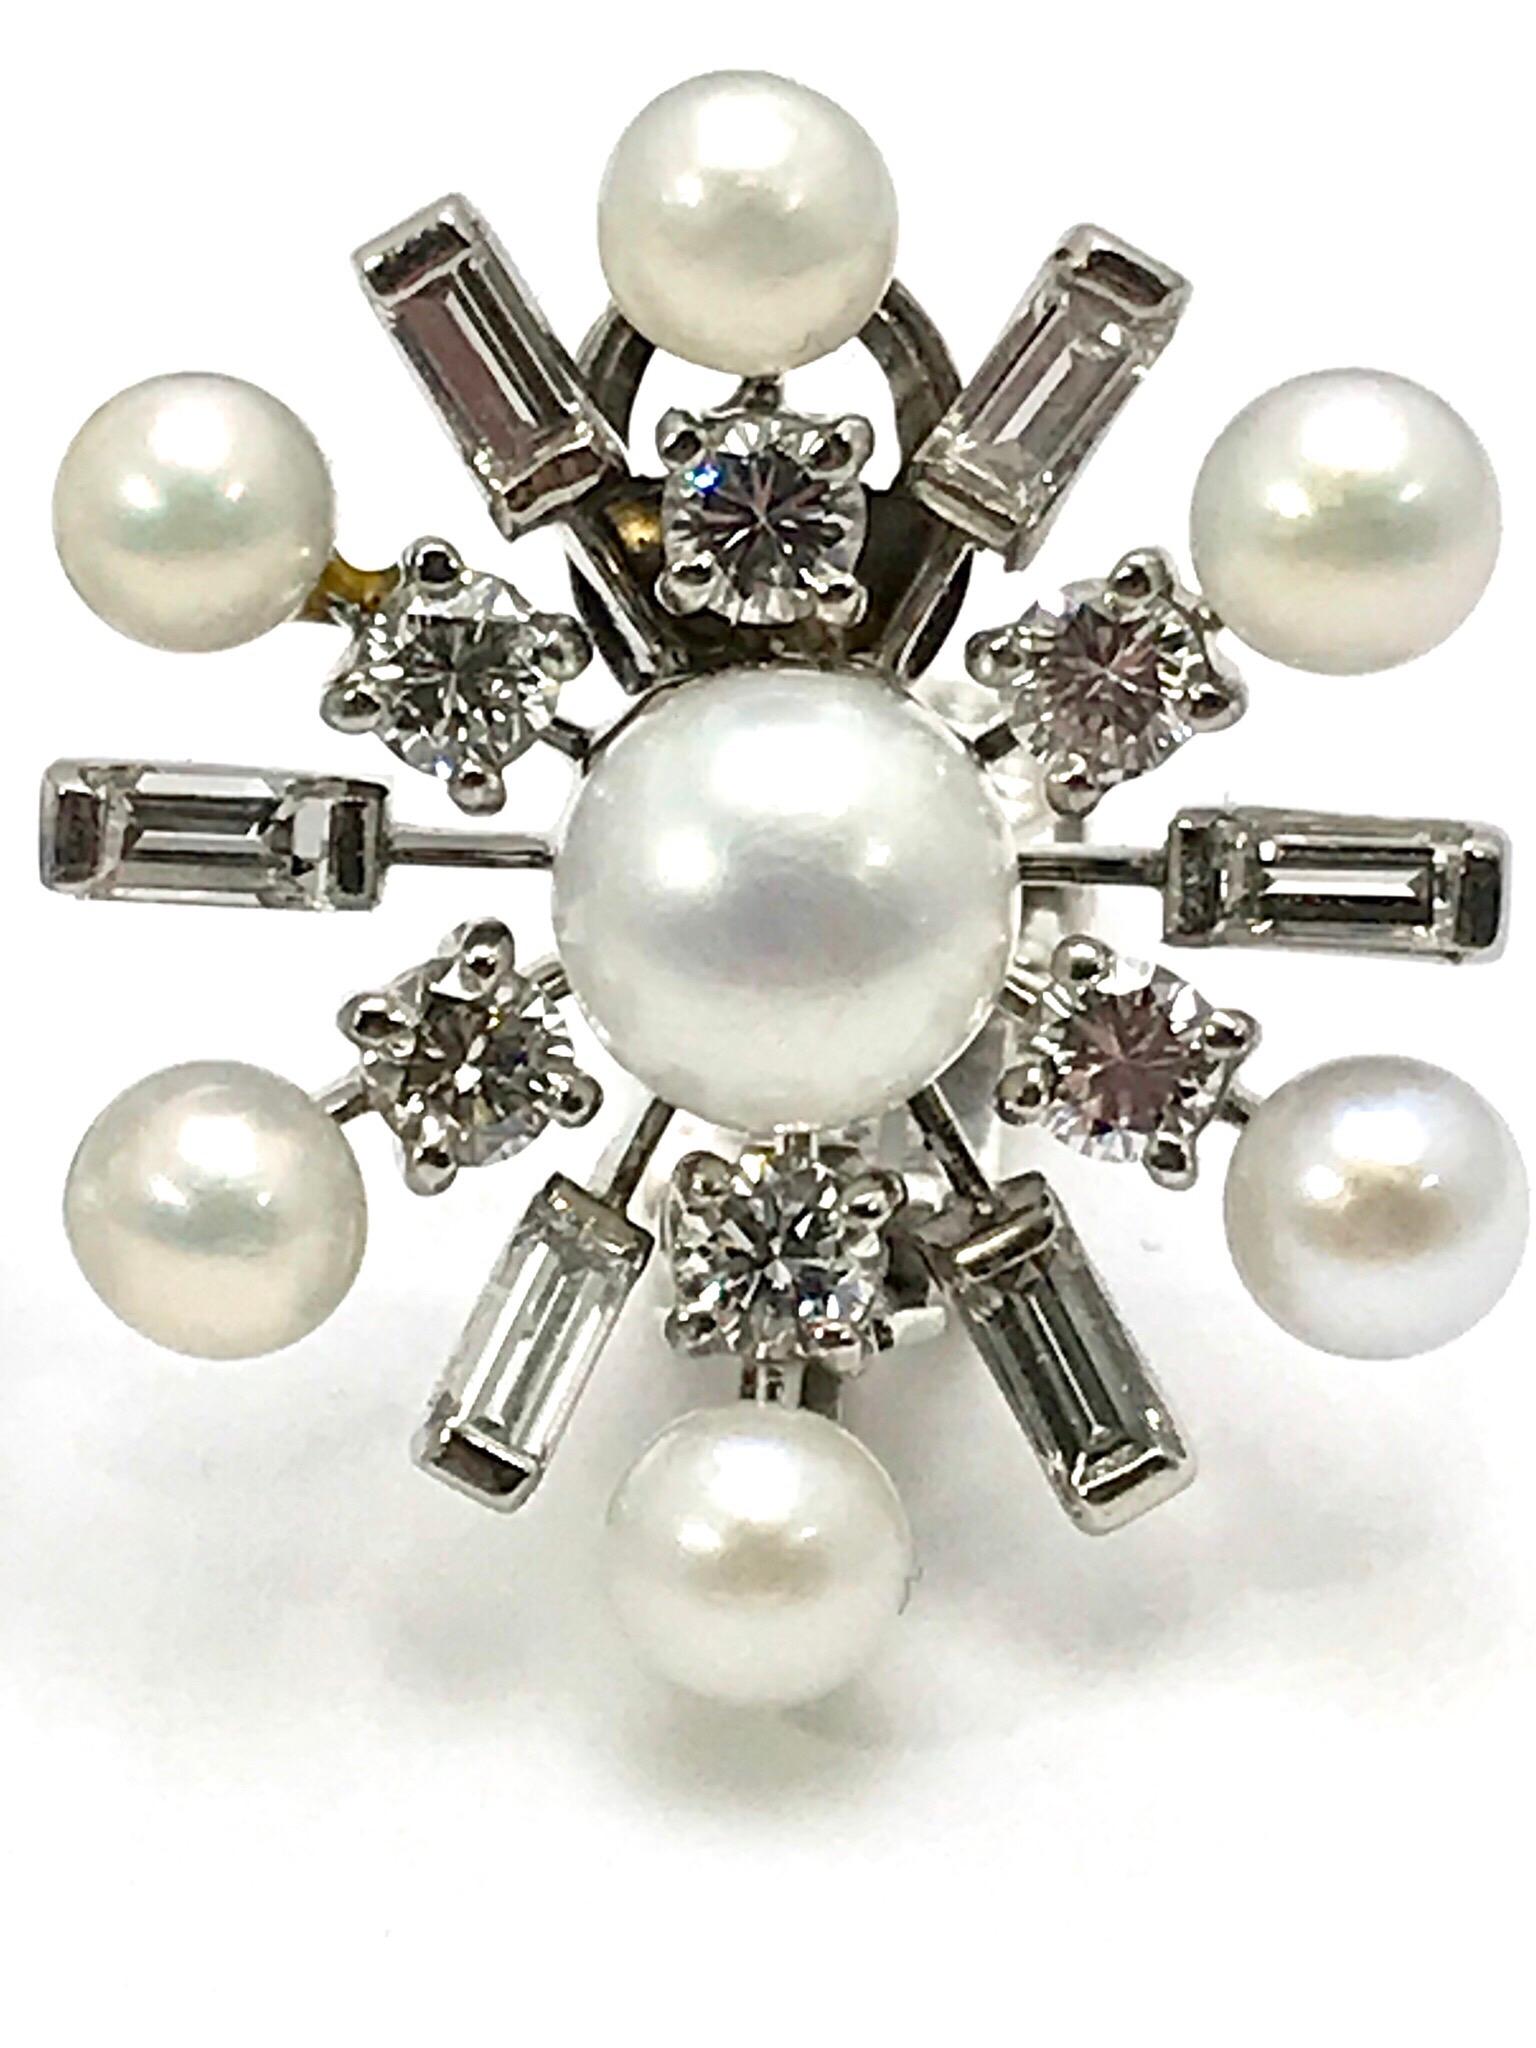 This is a gorgeous pair of Tiffany & Co. Diamond and Cultured Pearl 14 karat white gold clip back earrings.  The Diamonds are a combination of round brilliant cuts and baguettes.  The 1.68 carats of Diamonds are graded as F-G color, VS clarity, and